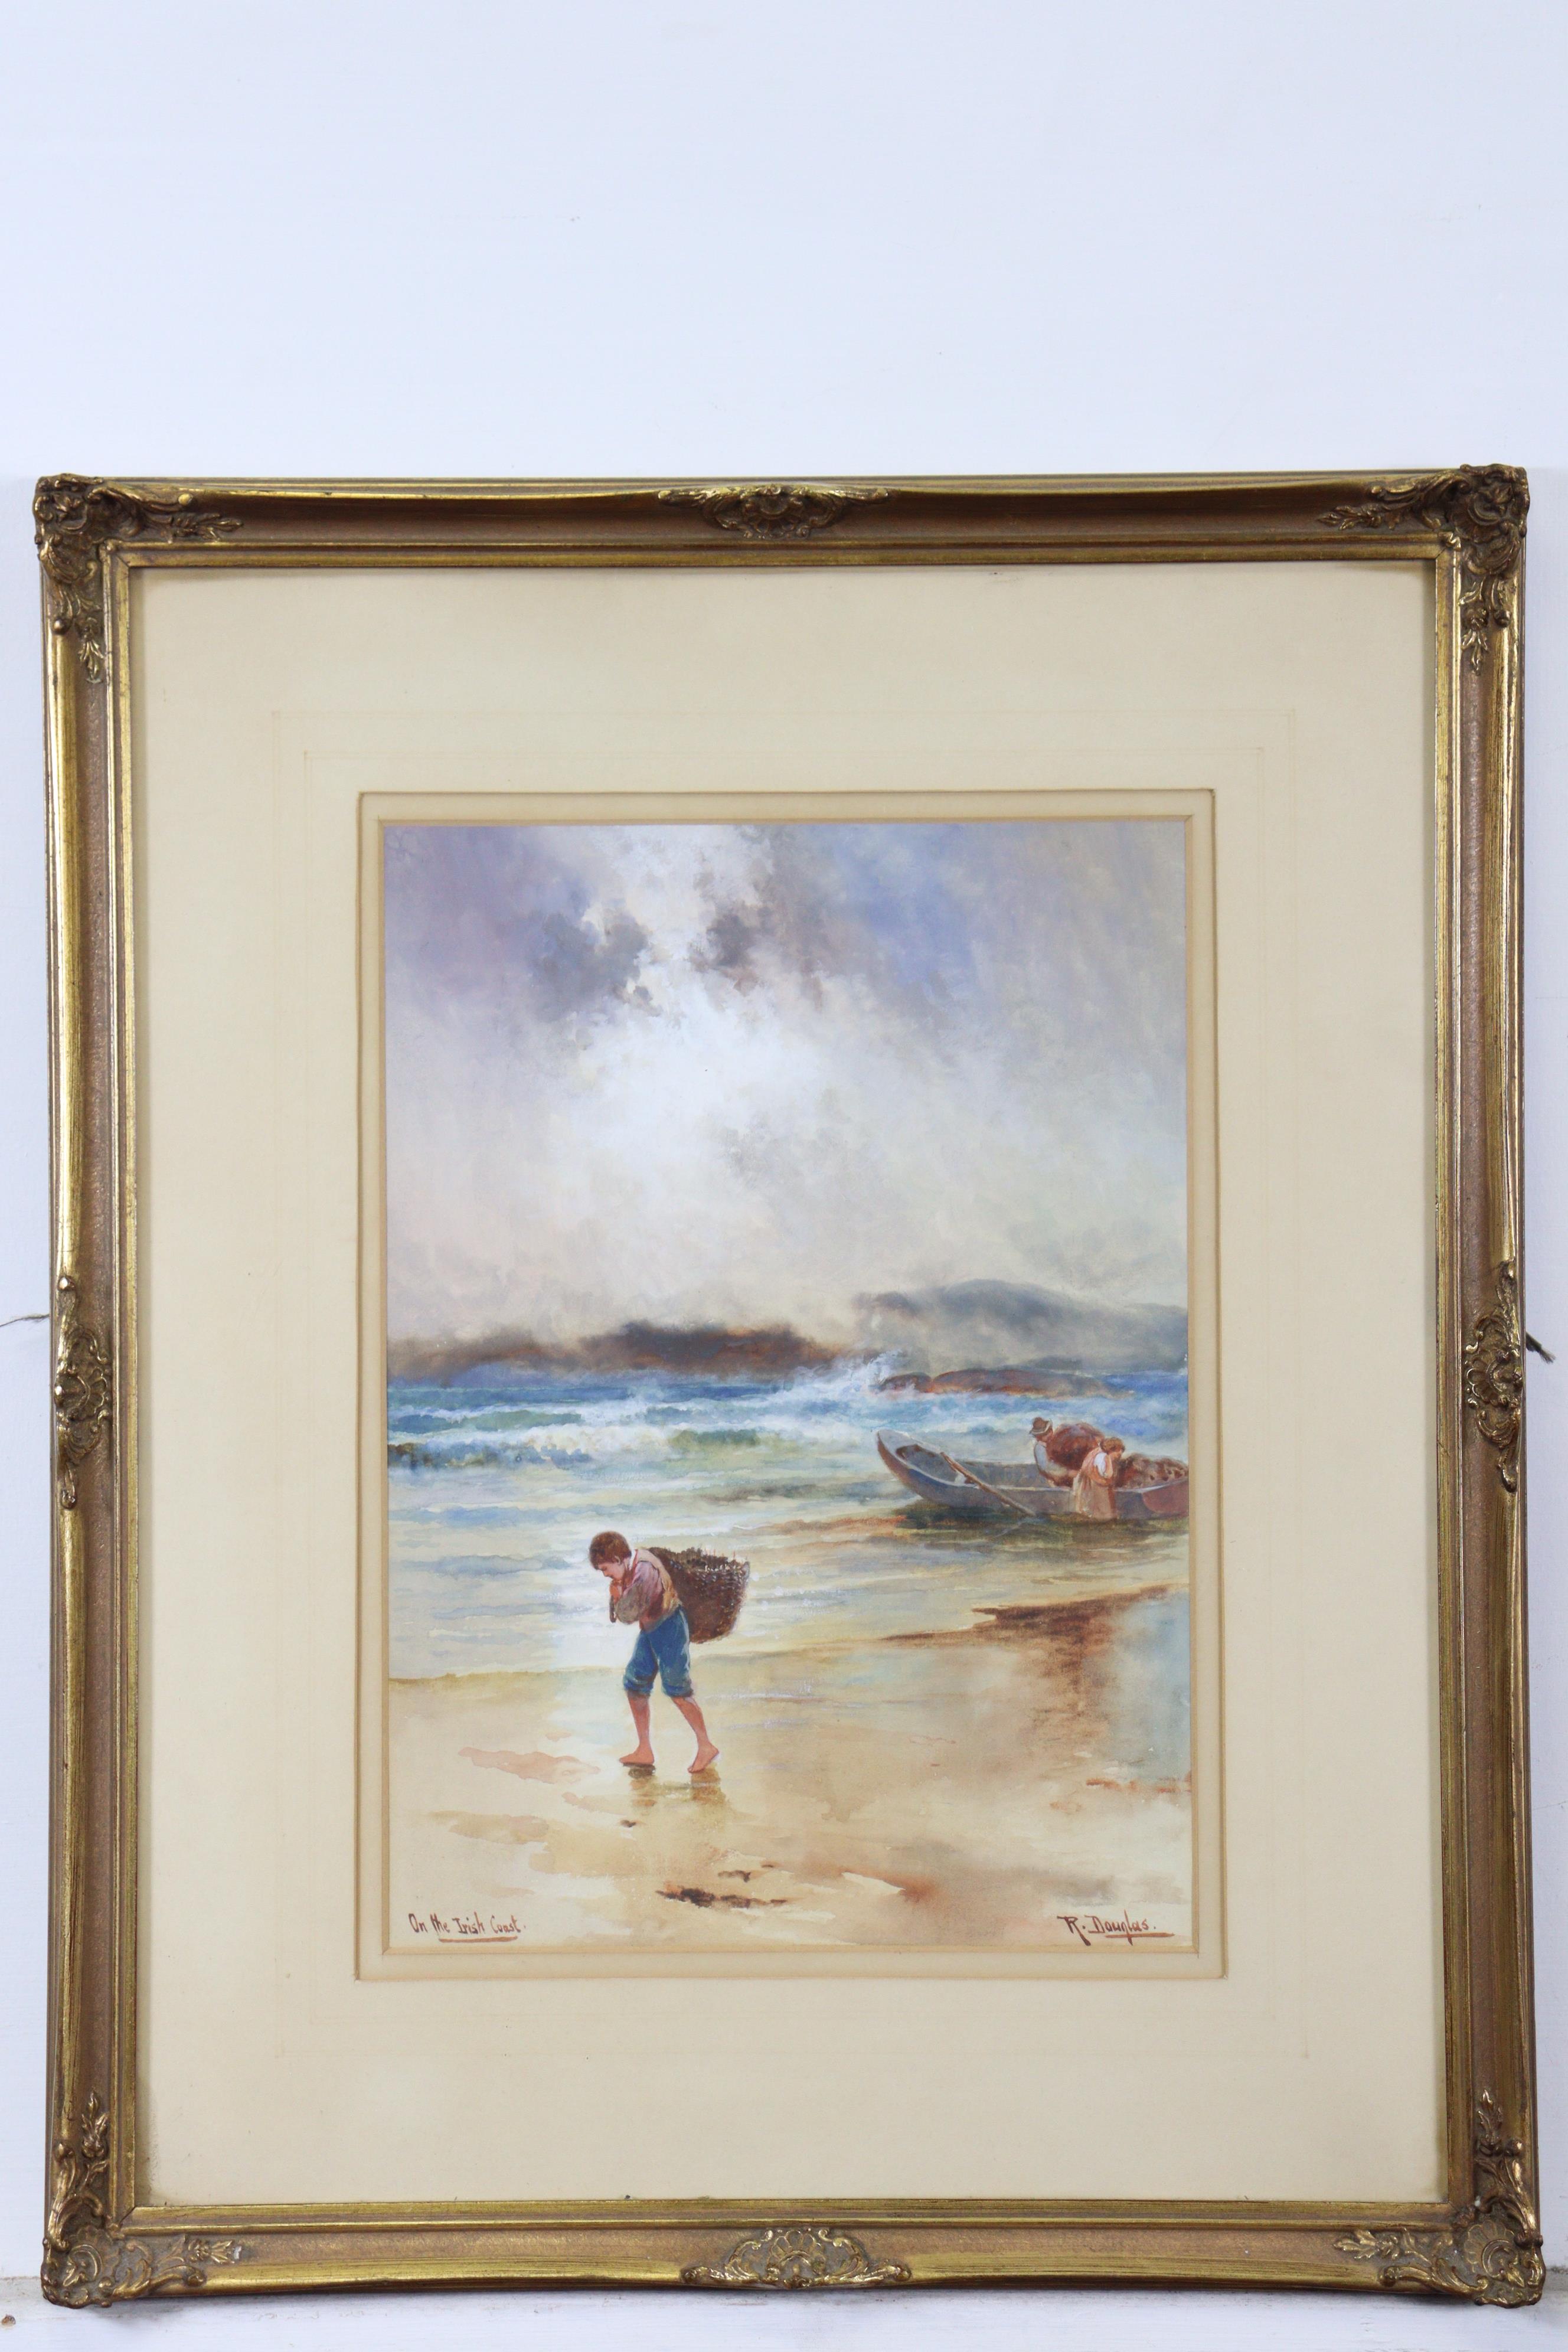 R. DOUGLAS (active early 20thC) “On The Irish Coast”, signed & inscribed, Watercolour: 9½” x 13½”, - Image 2 of 2